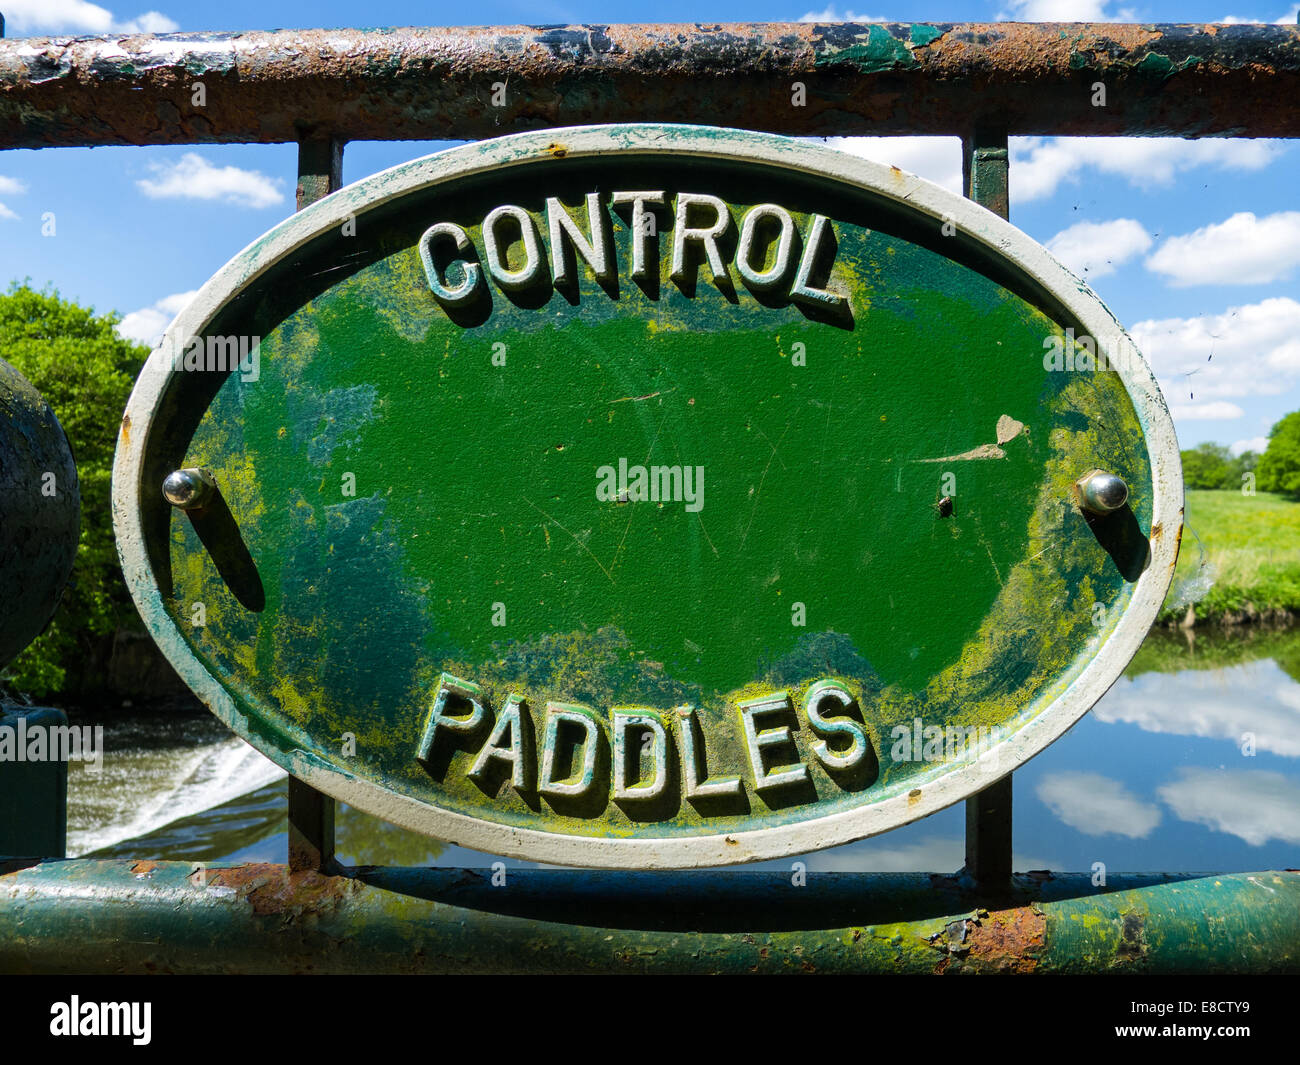 Control Paddles notice on weir railing Stock Photo